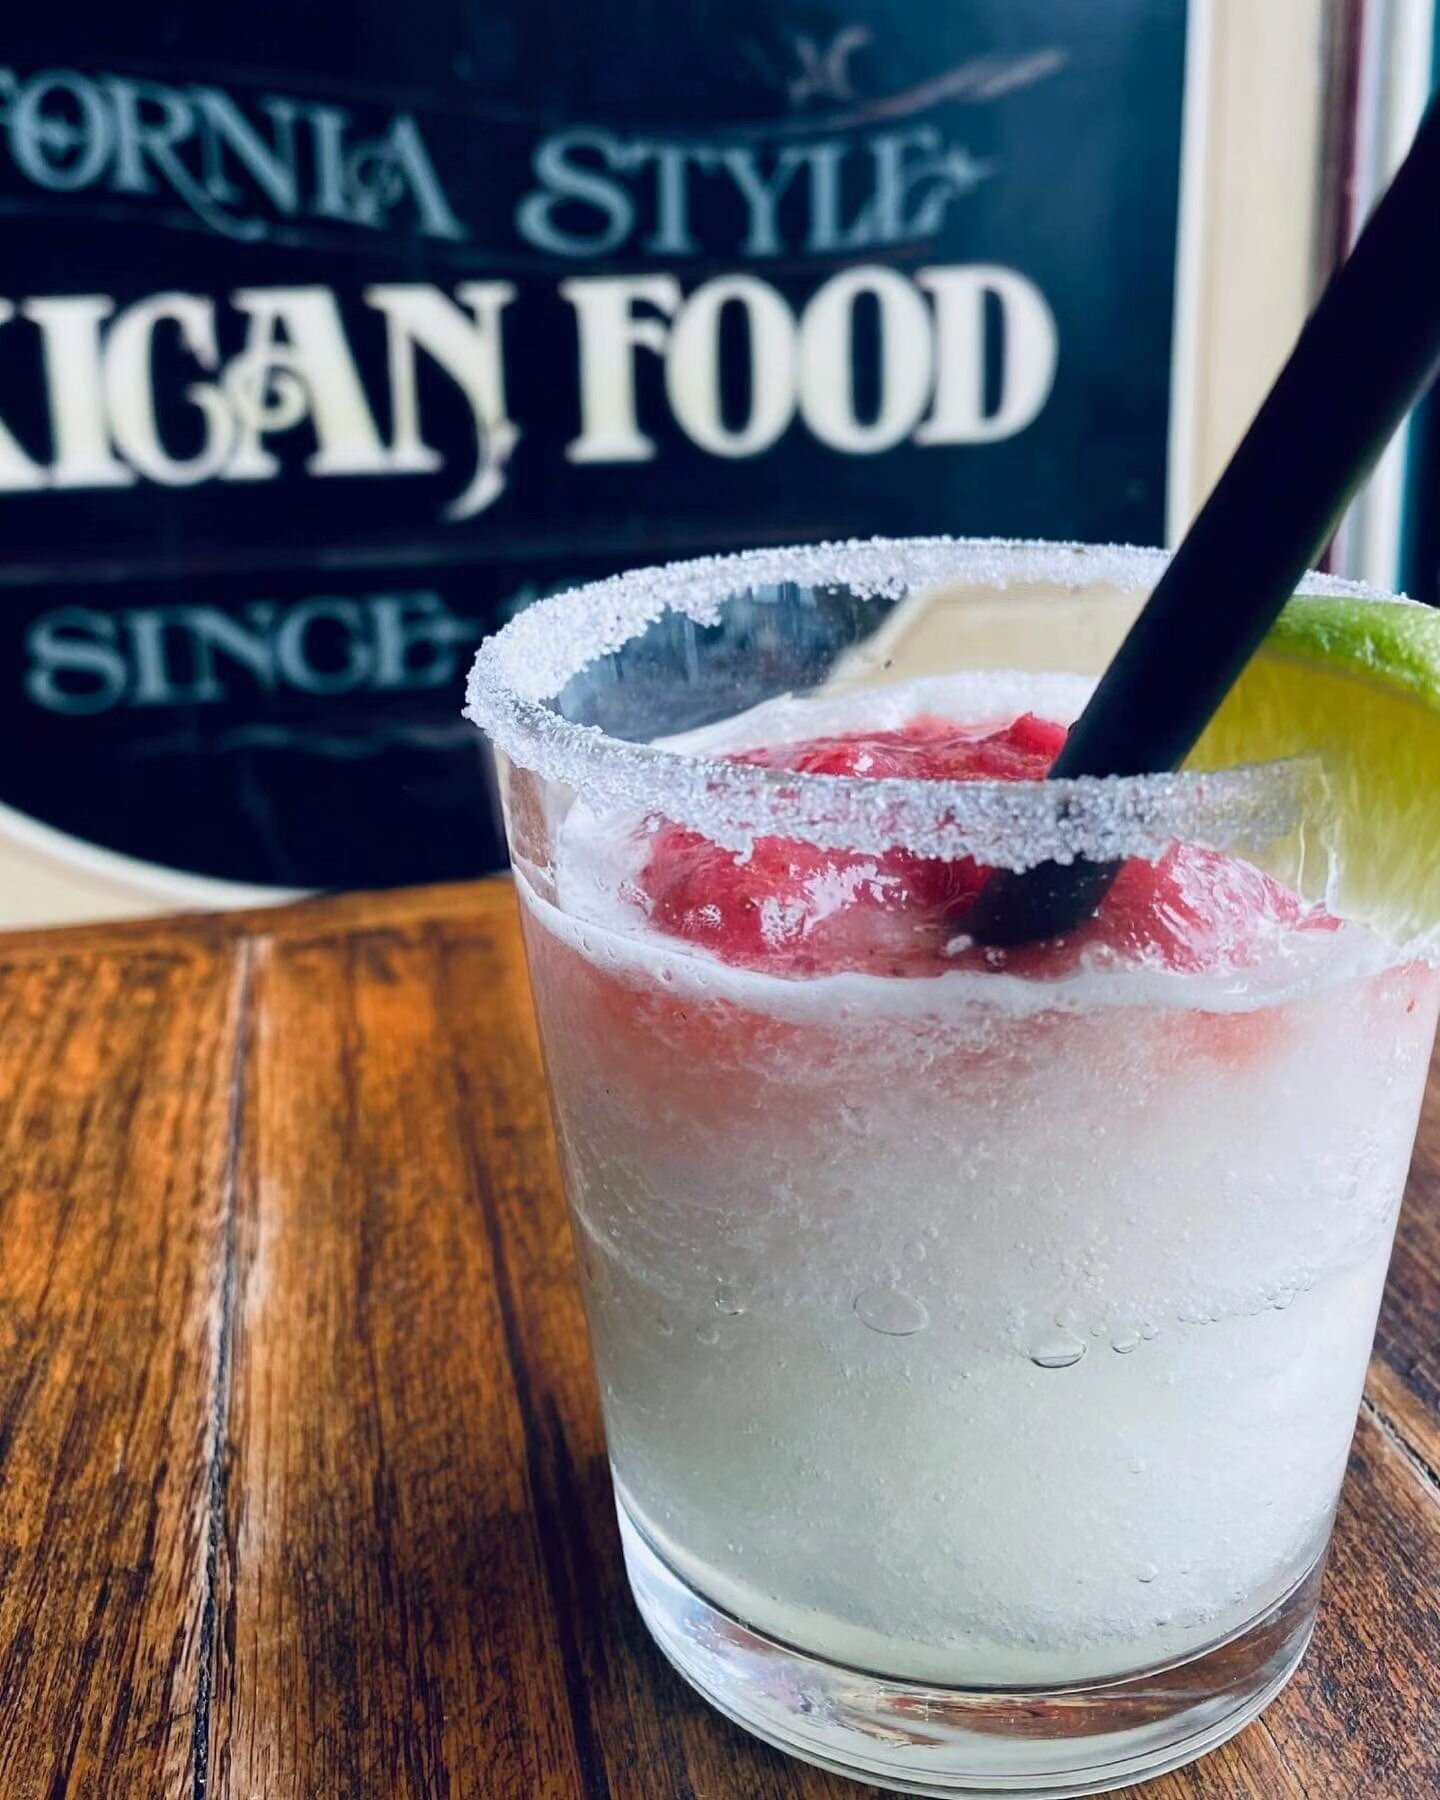 Happy Tequila Tuesday! 🎉 

Pop by and see us today for $2 OFF our signature Tequila Cocktails and get your fill of our delicious tacos while you're at.🍹🌮

Grab a table 👉 https://bit.ly/3nsBXL8